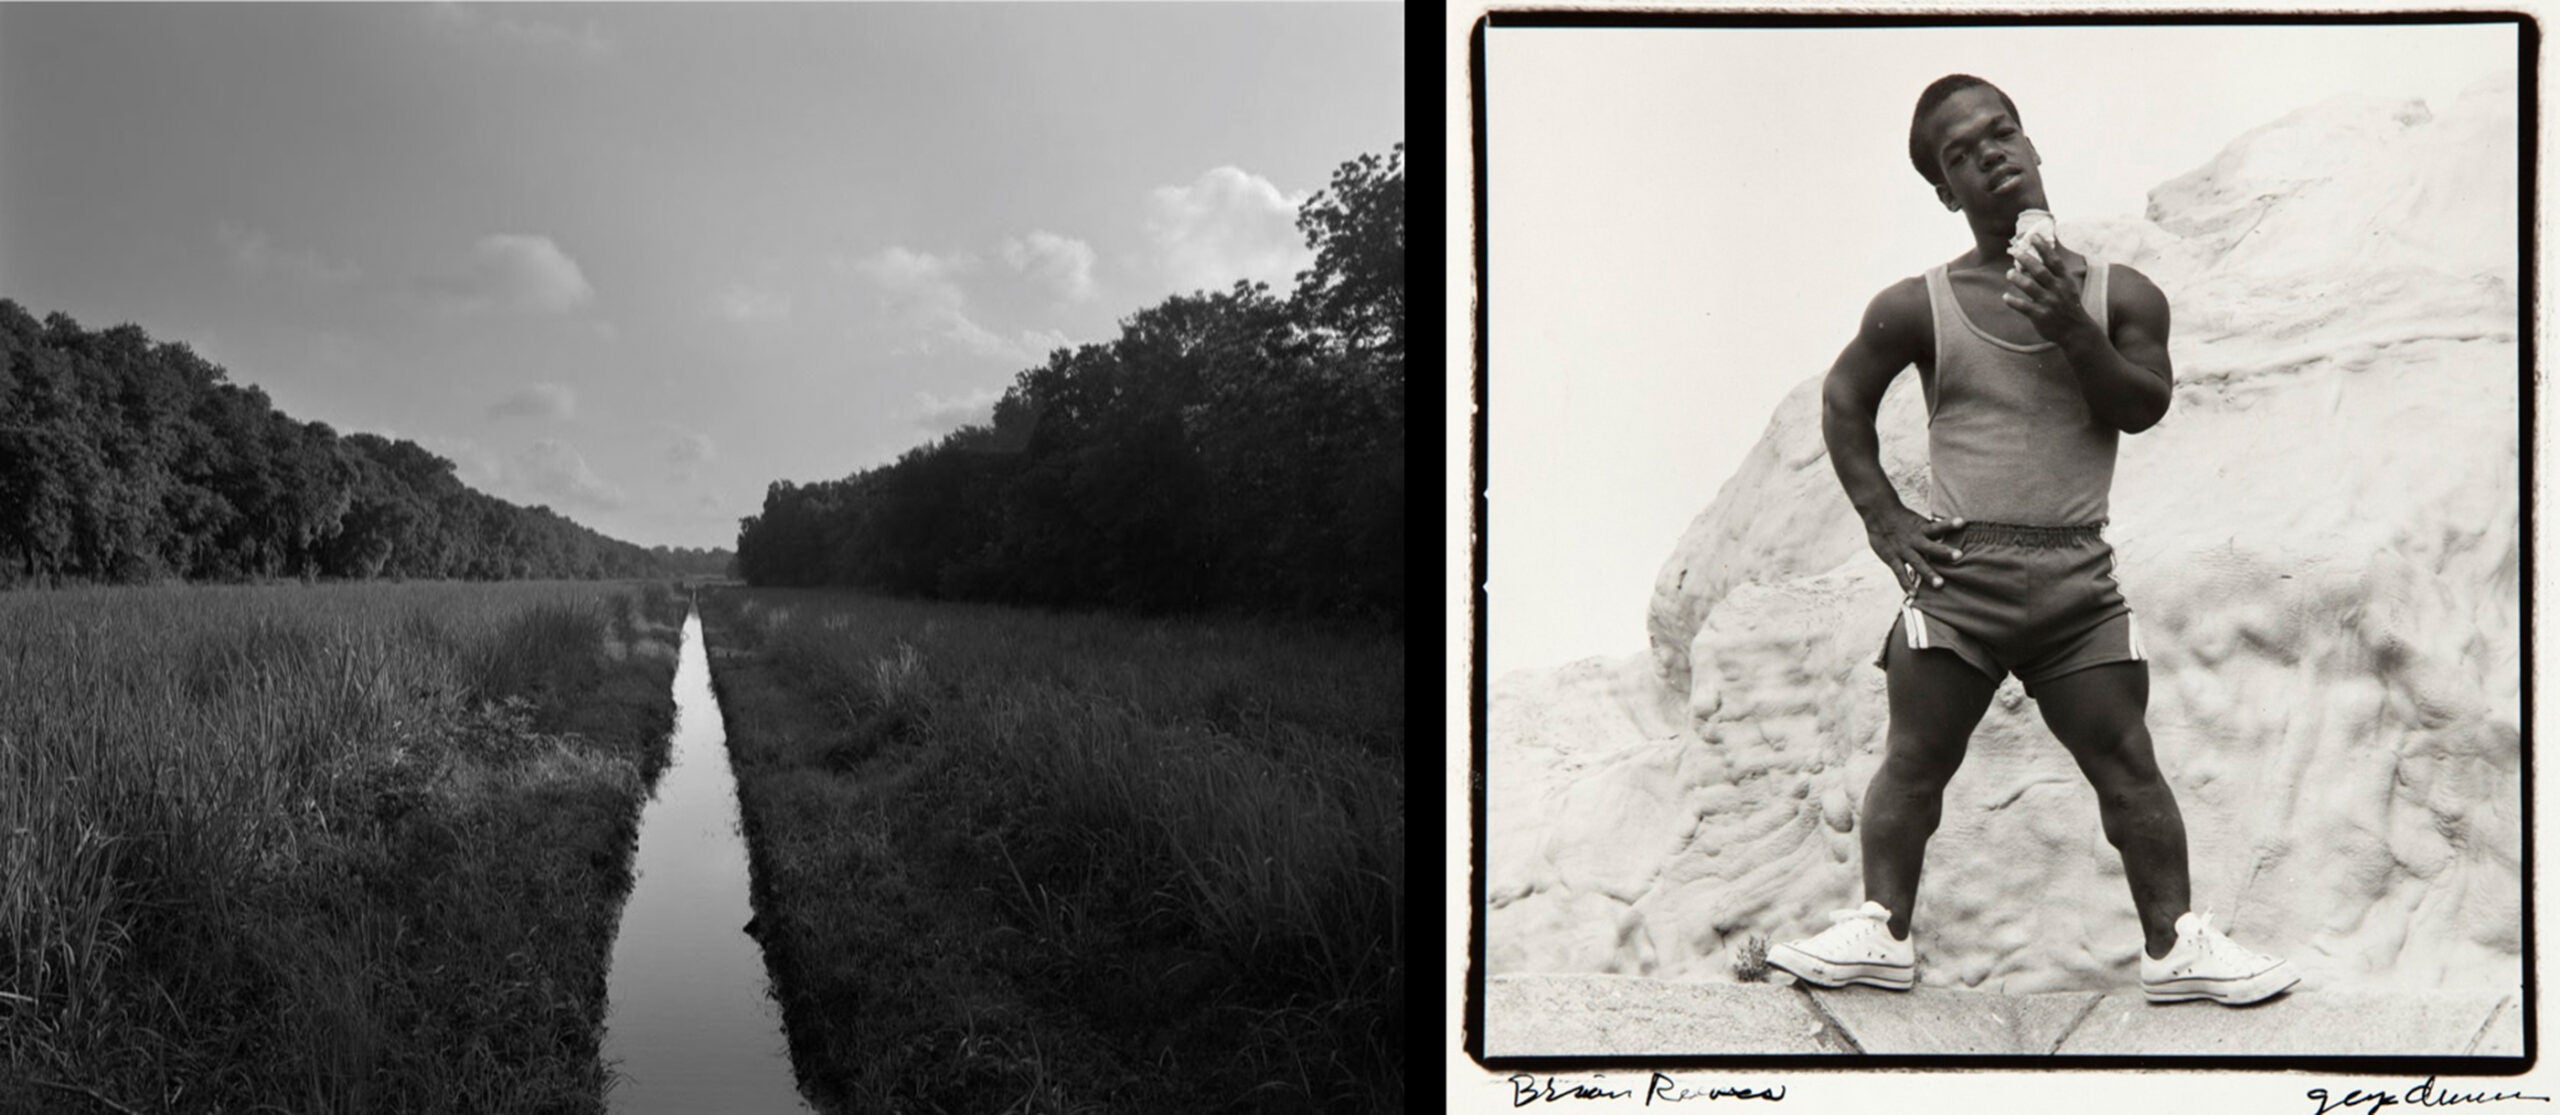 Above left: “Irrigation Ditch,” by Dawoud Bey, 2019. Gelatin silver print. 44 x 55 inches (image), 48 x 59 inches (dimensions of paper). © Dawoud Bey. Above right: “Brian Reeves,” by George Dureau. Vintage silver gelatin print, 10 x 8 inches.